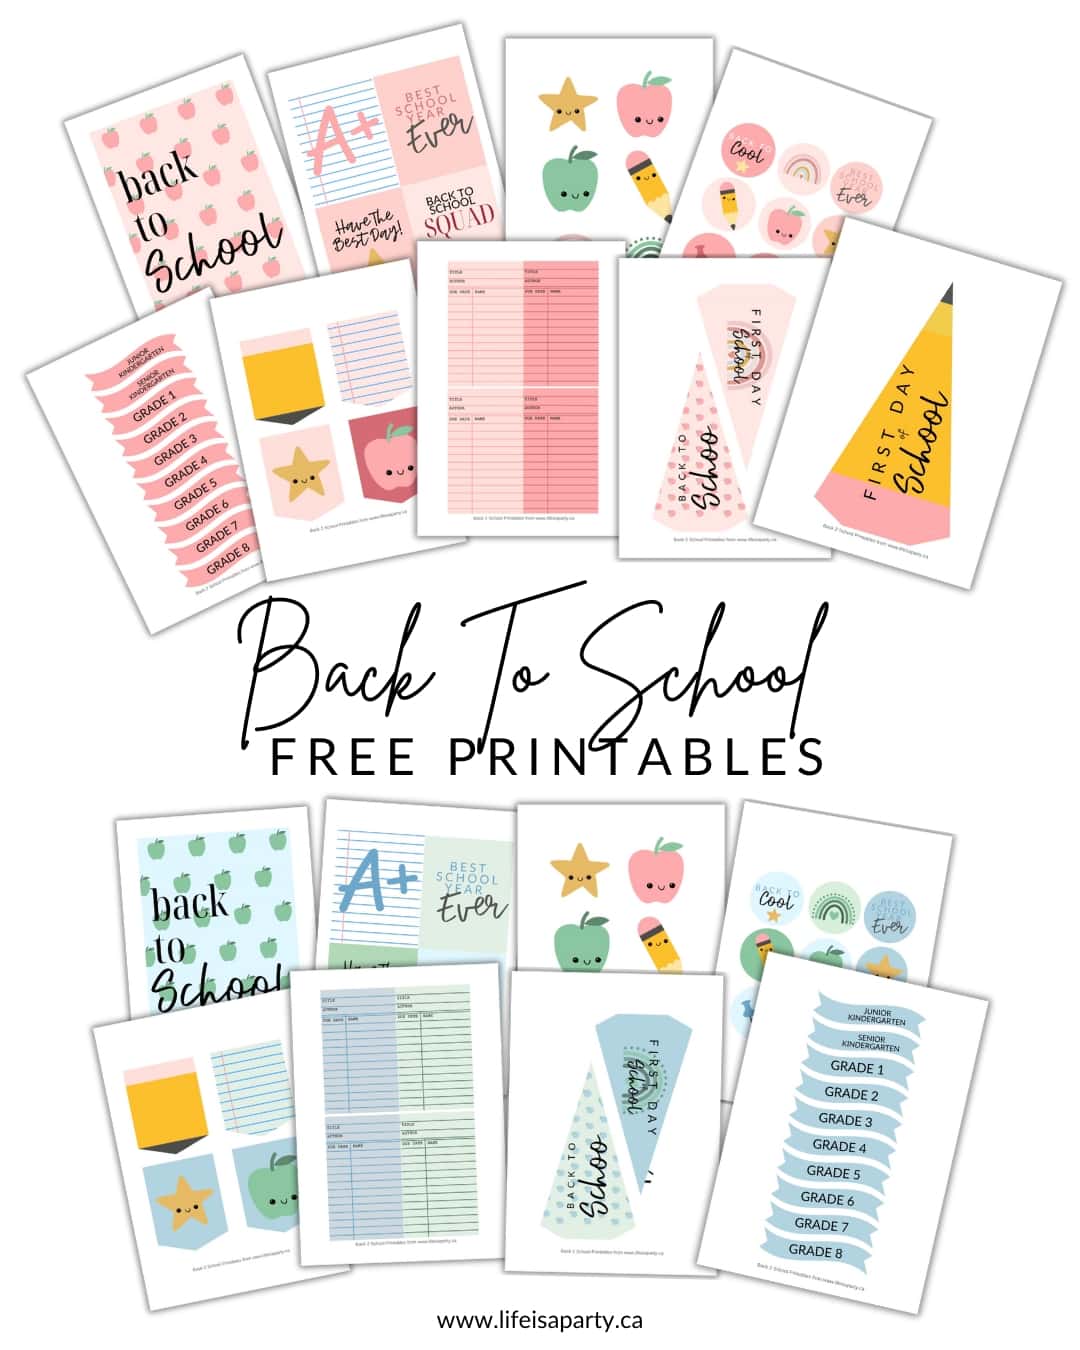 Back To School Free Printables: pennant flags, lunch box notes, pencil party hats, banners, cupcake picks and more in pink or blue.